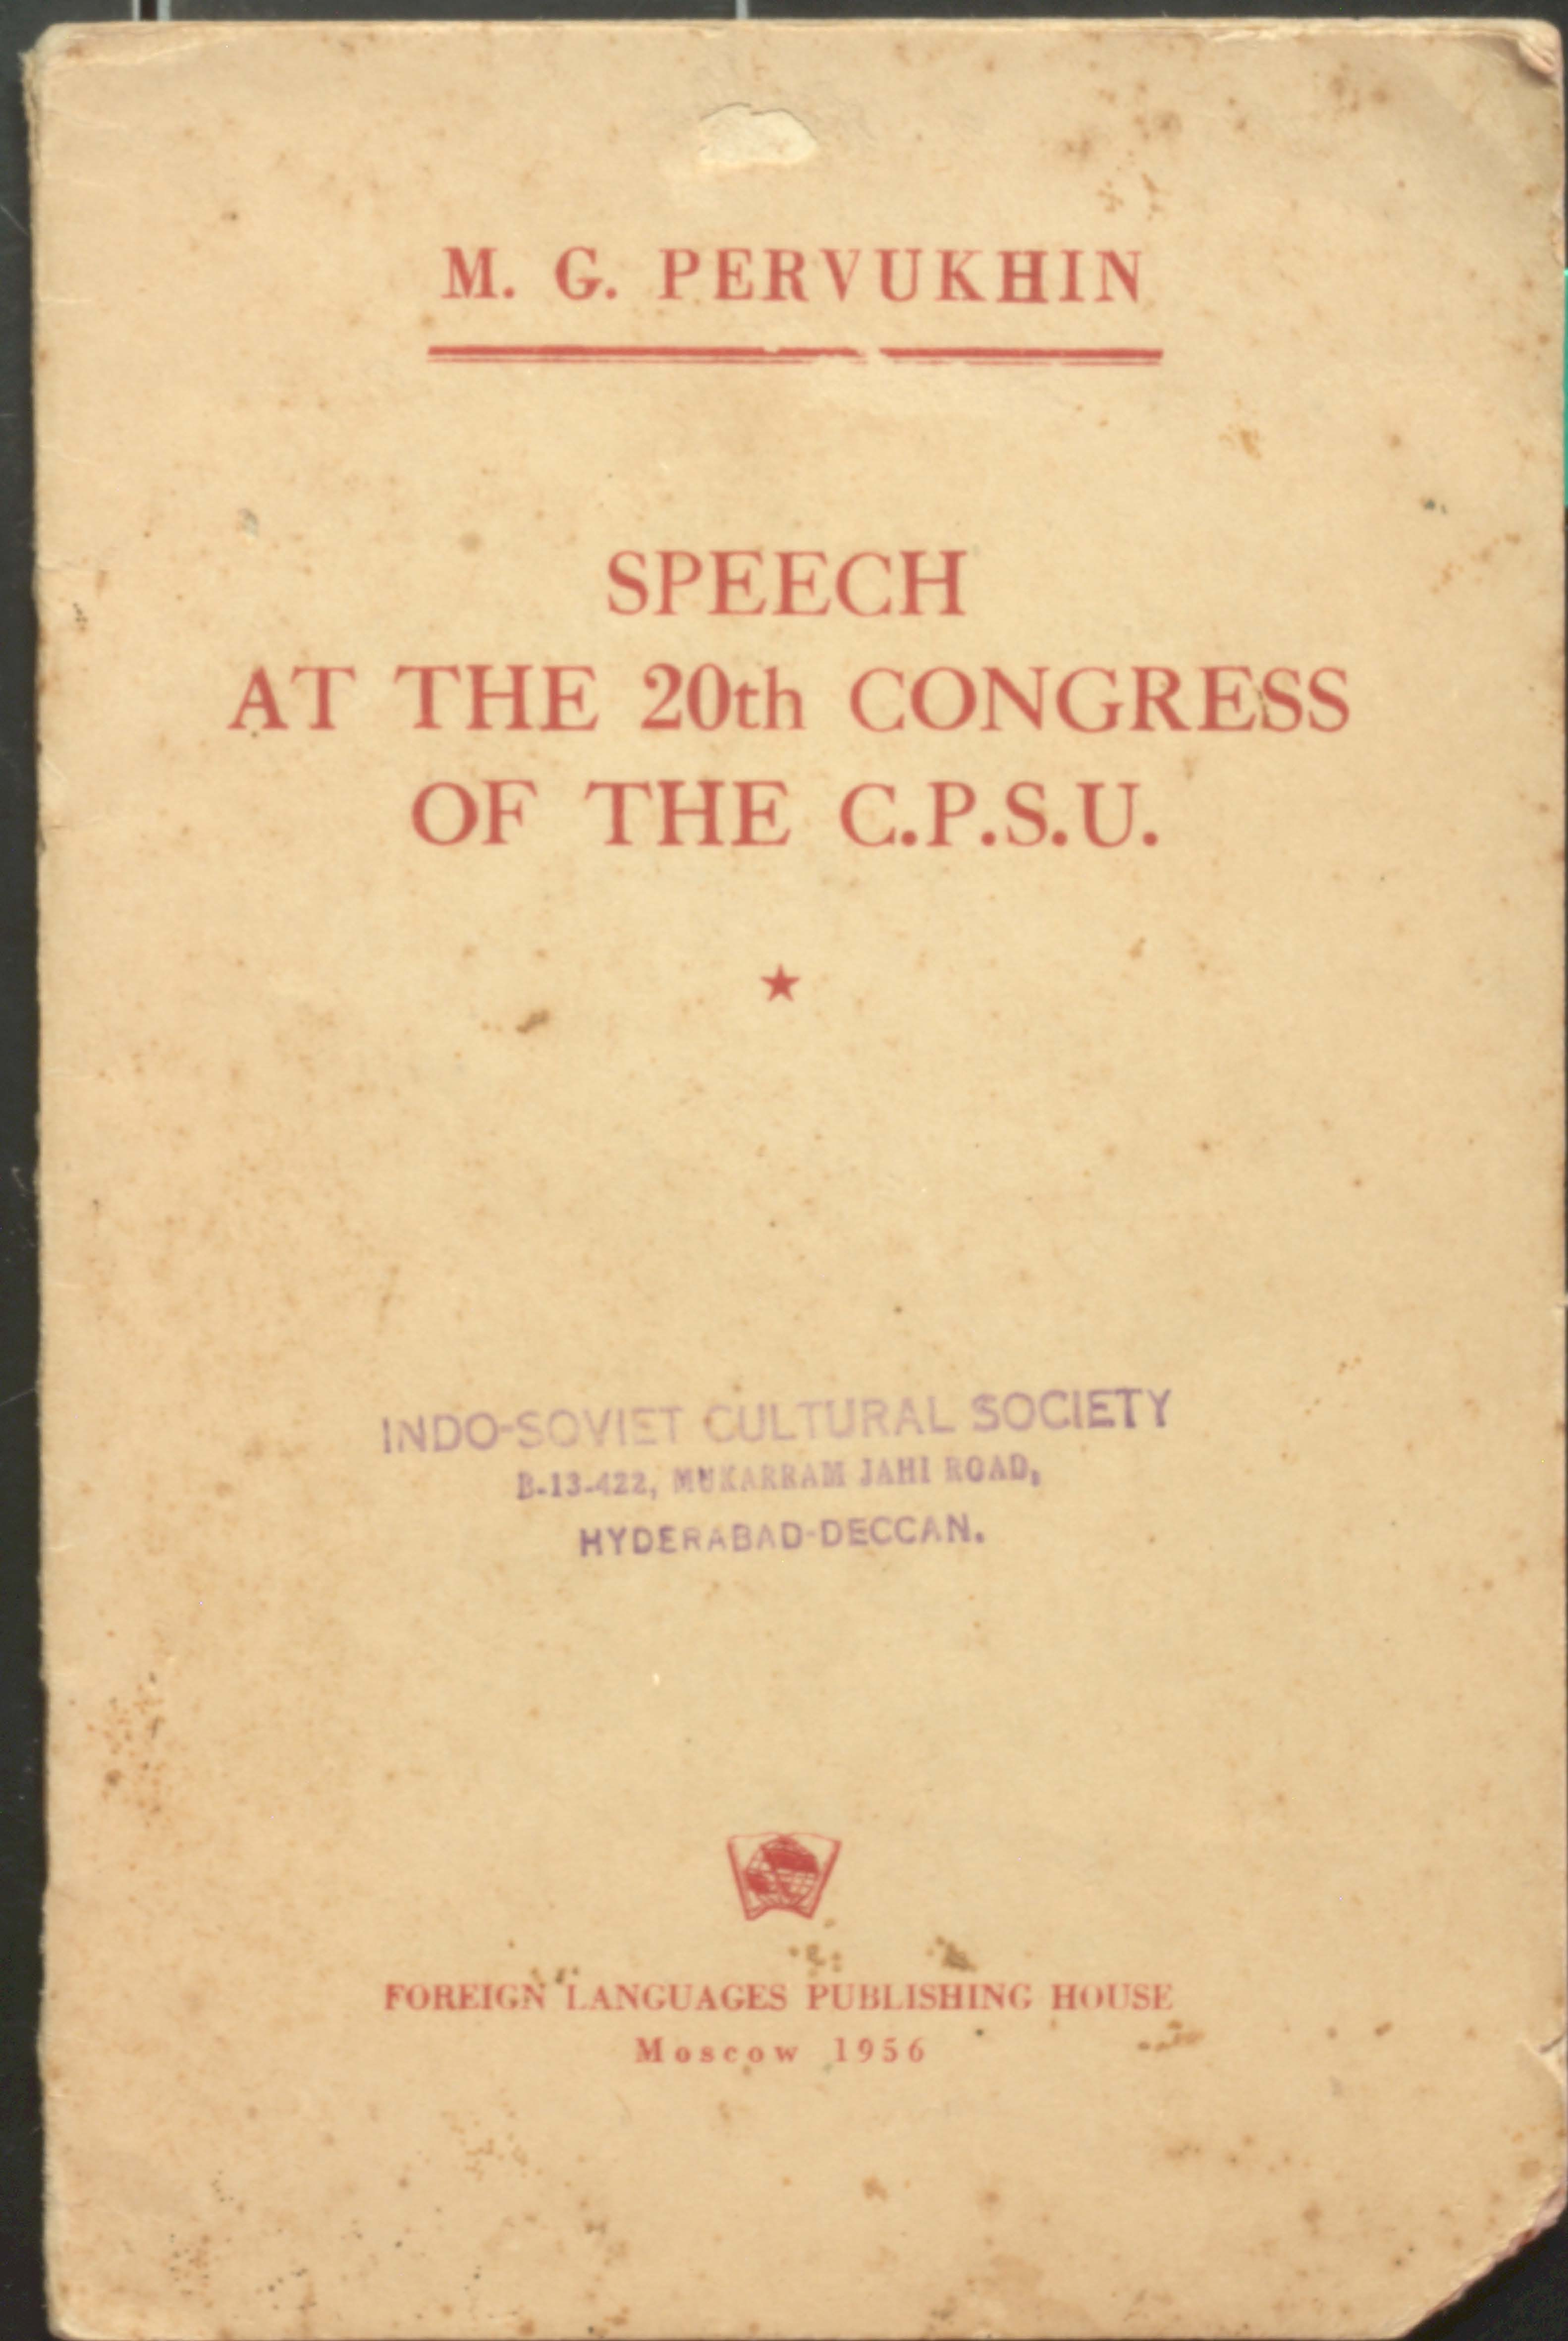 SPEECH AT THE 20TH CONGRESS OF THE CPSU 